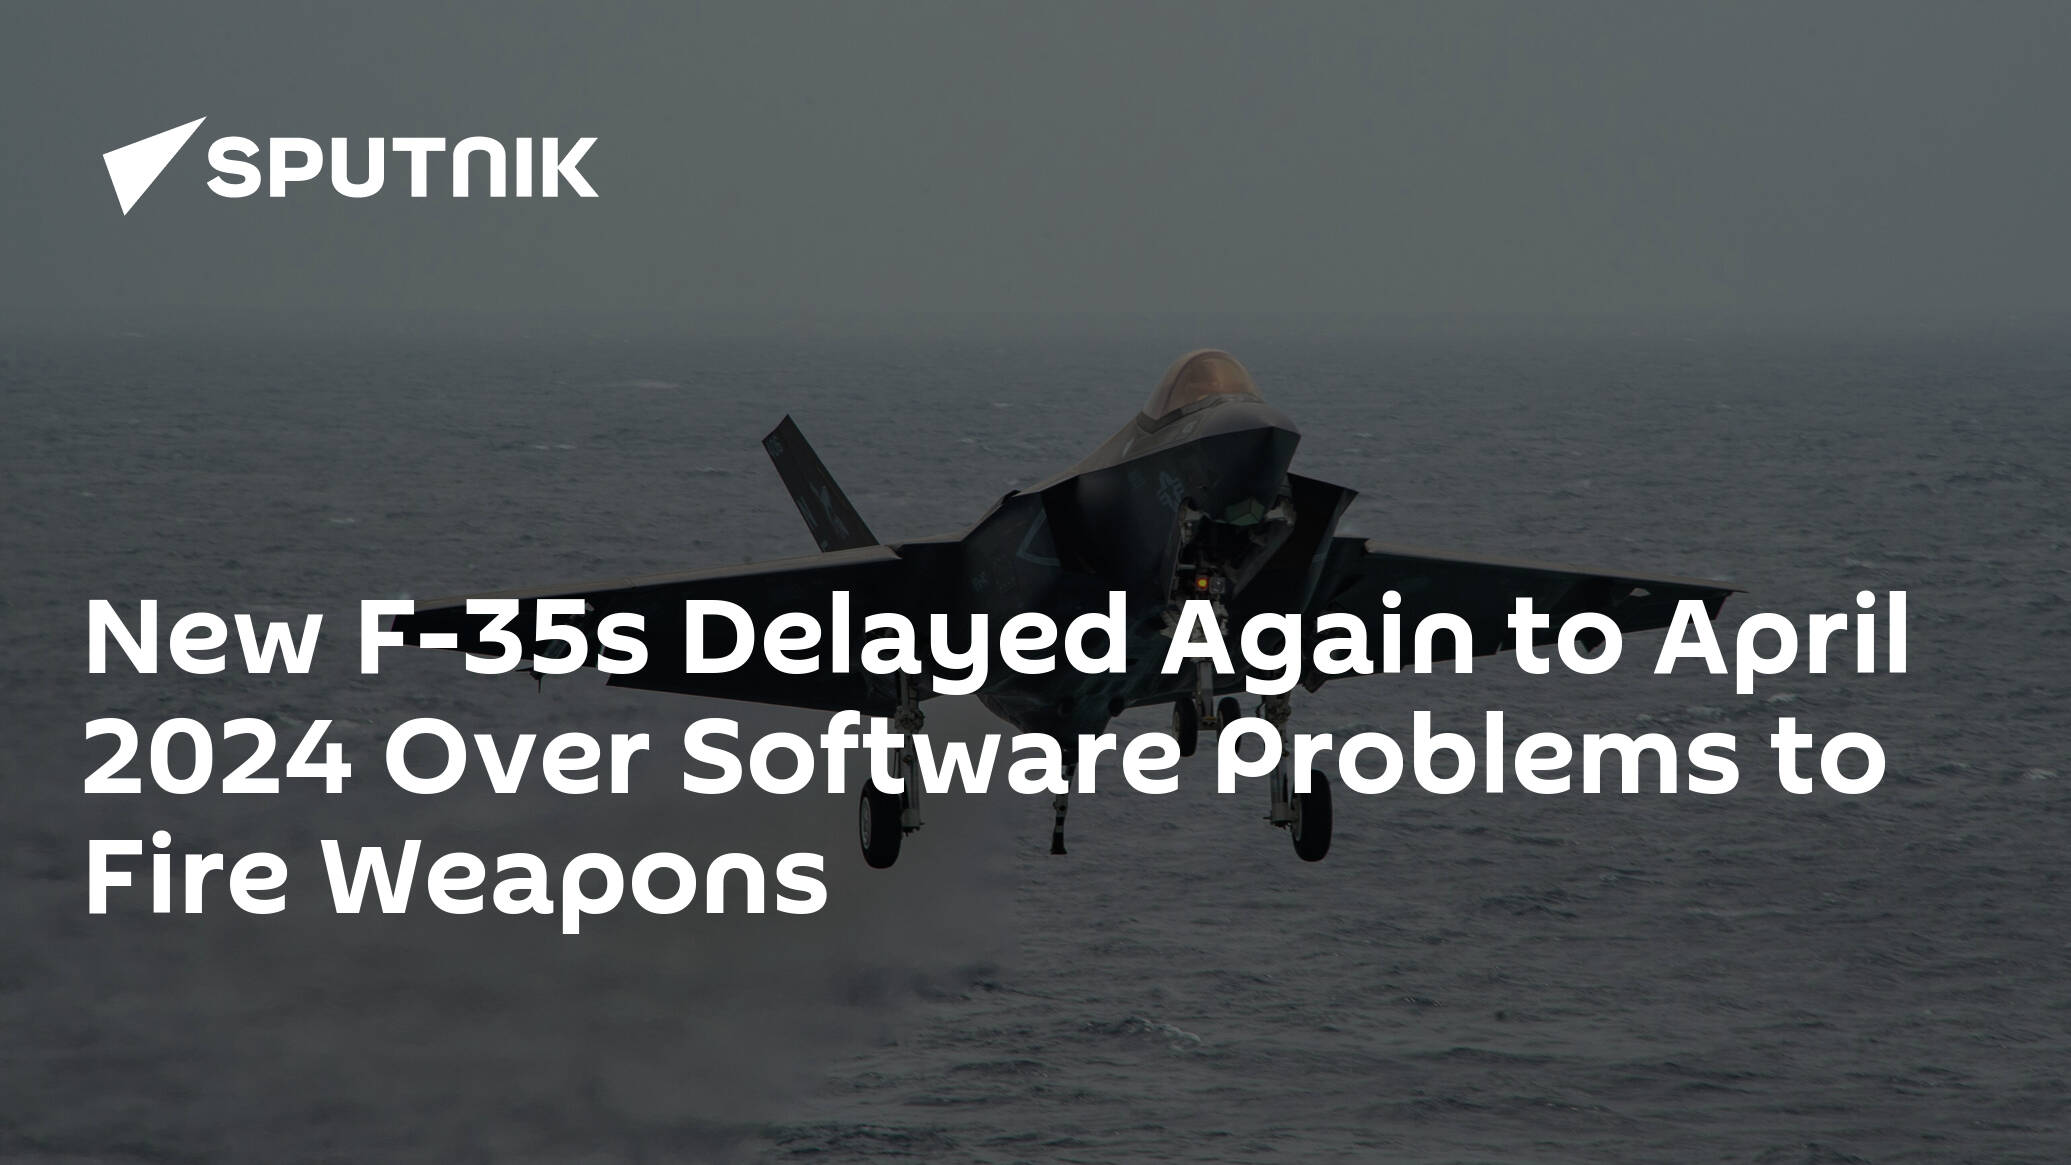 New F-35s Delayed Again to April 2024 Over Software Problems to Fire Weapons